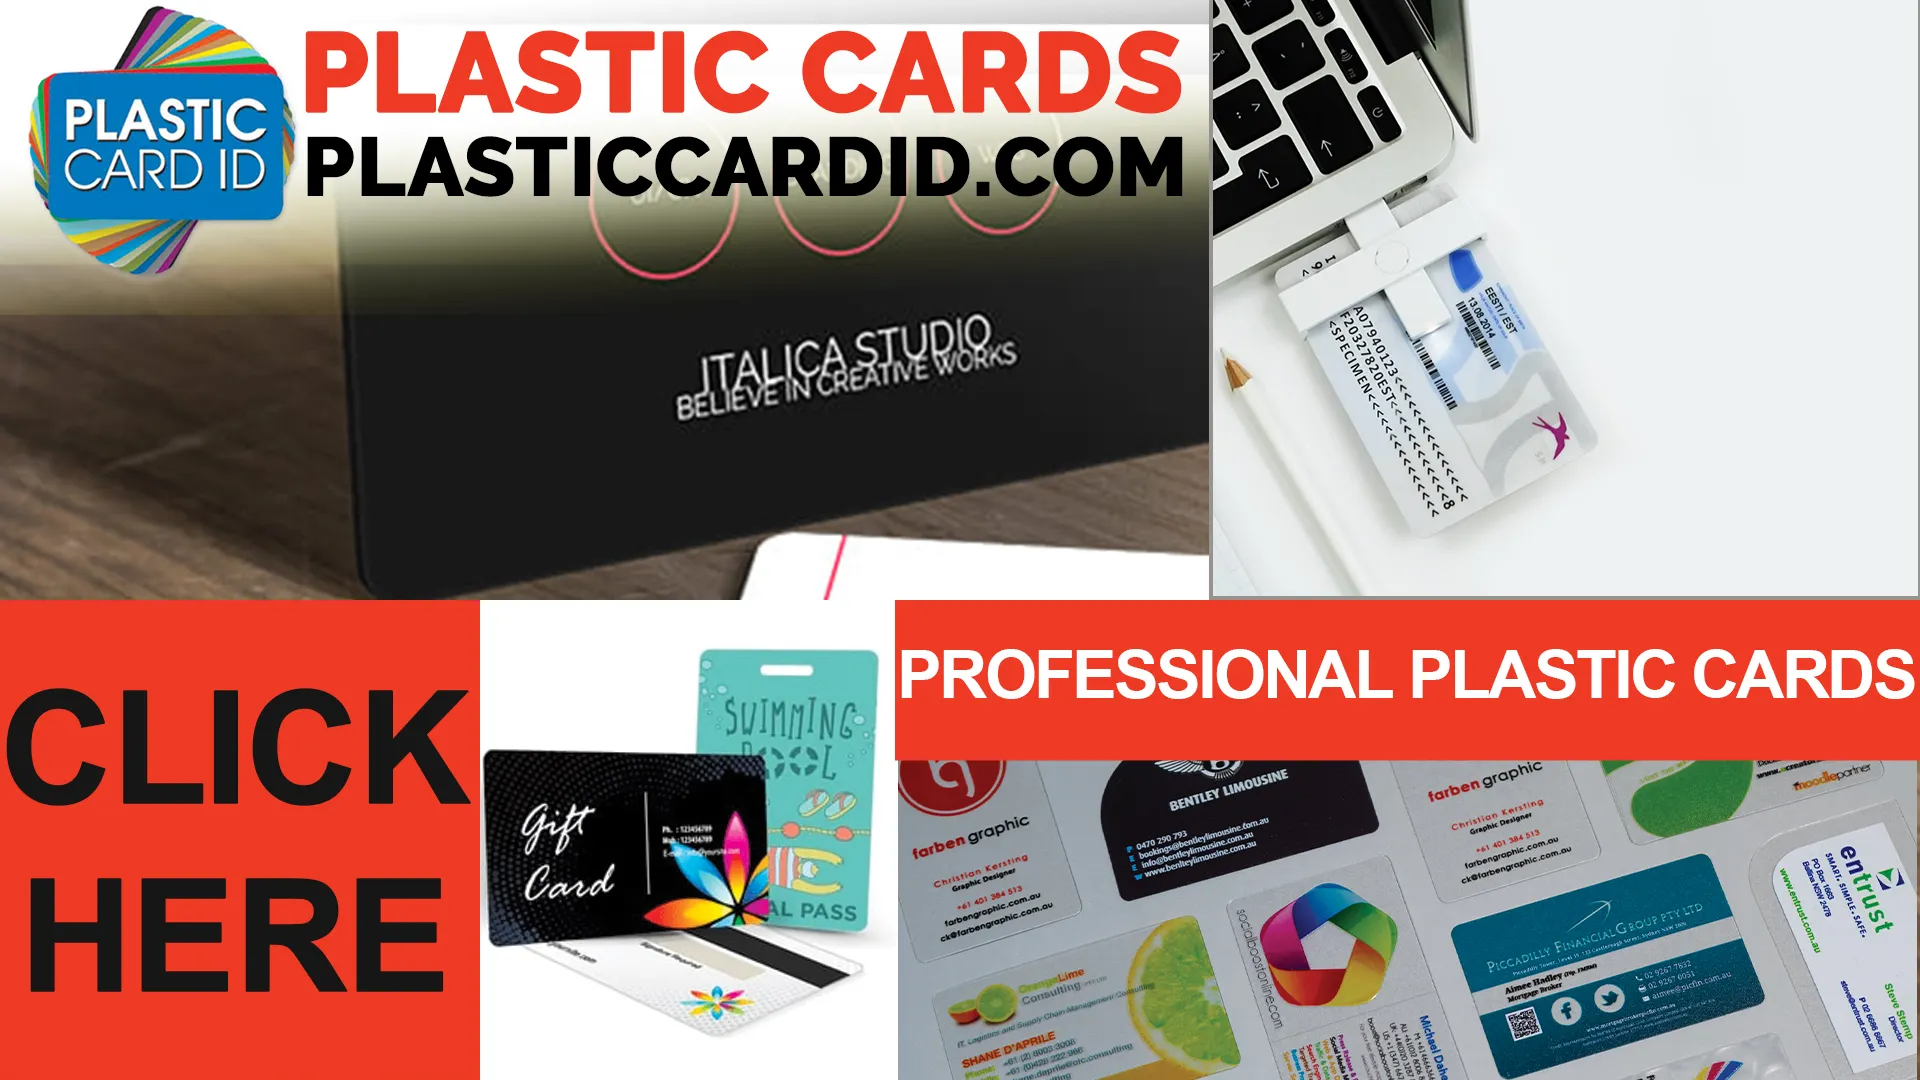 Welcome to the World of Plastic Card Printing Excellence